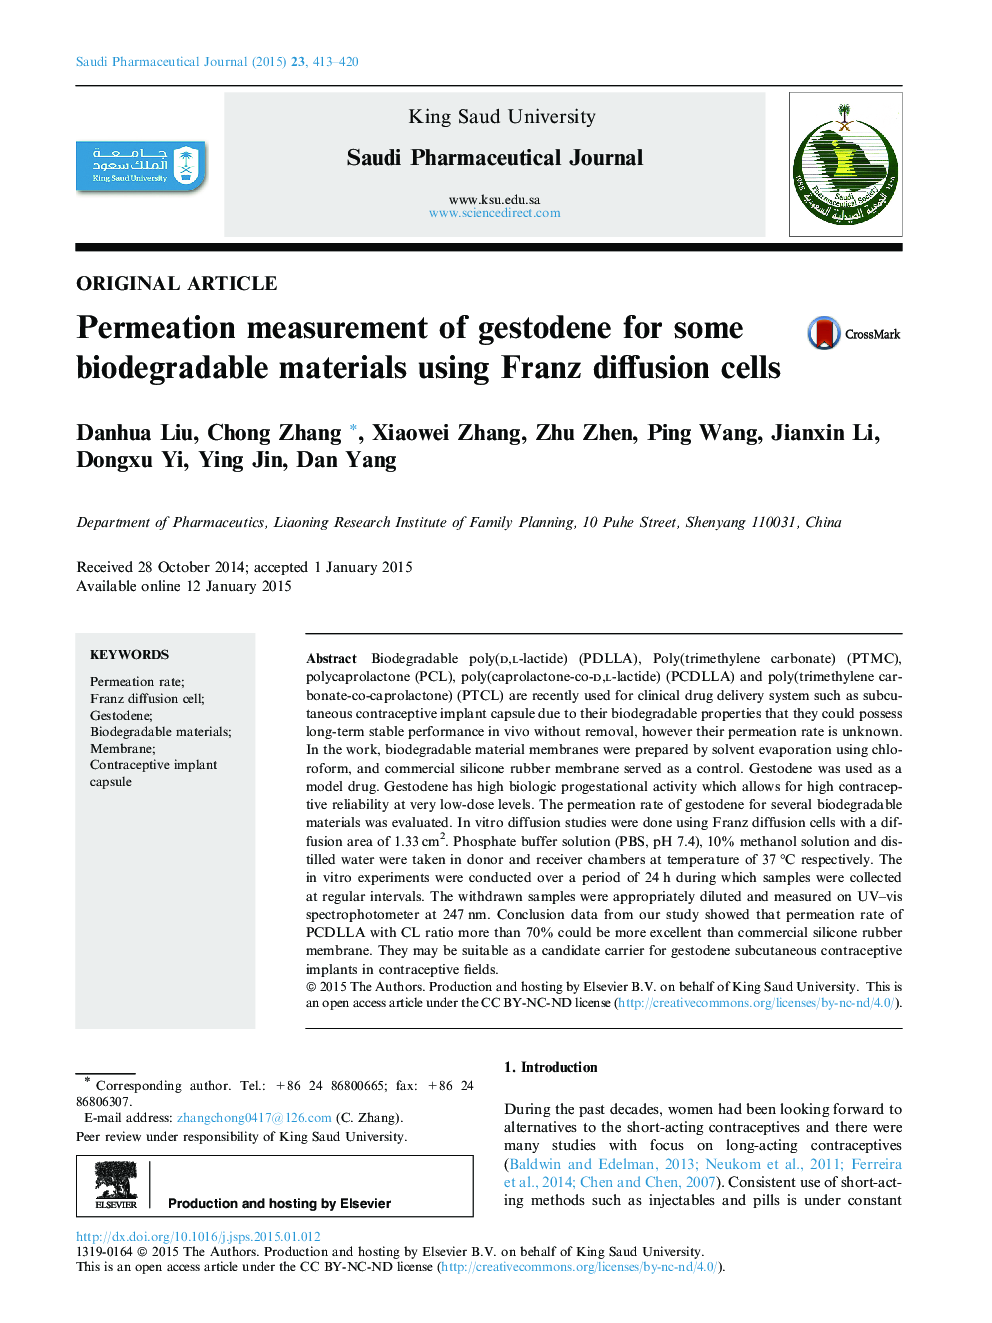 Permeation measurement of gestodene for some biodegradable materials using Franz diffusion cells 